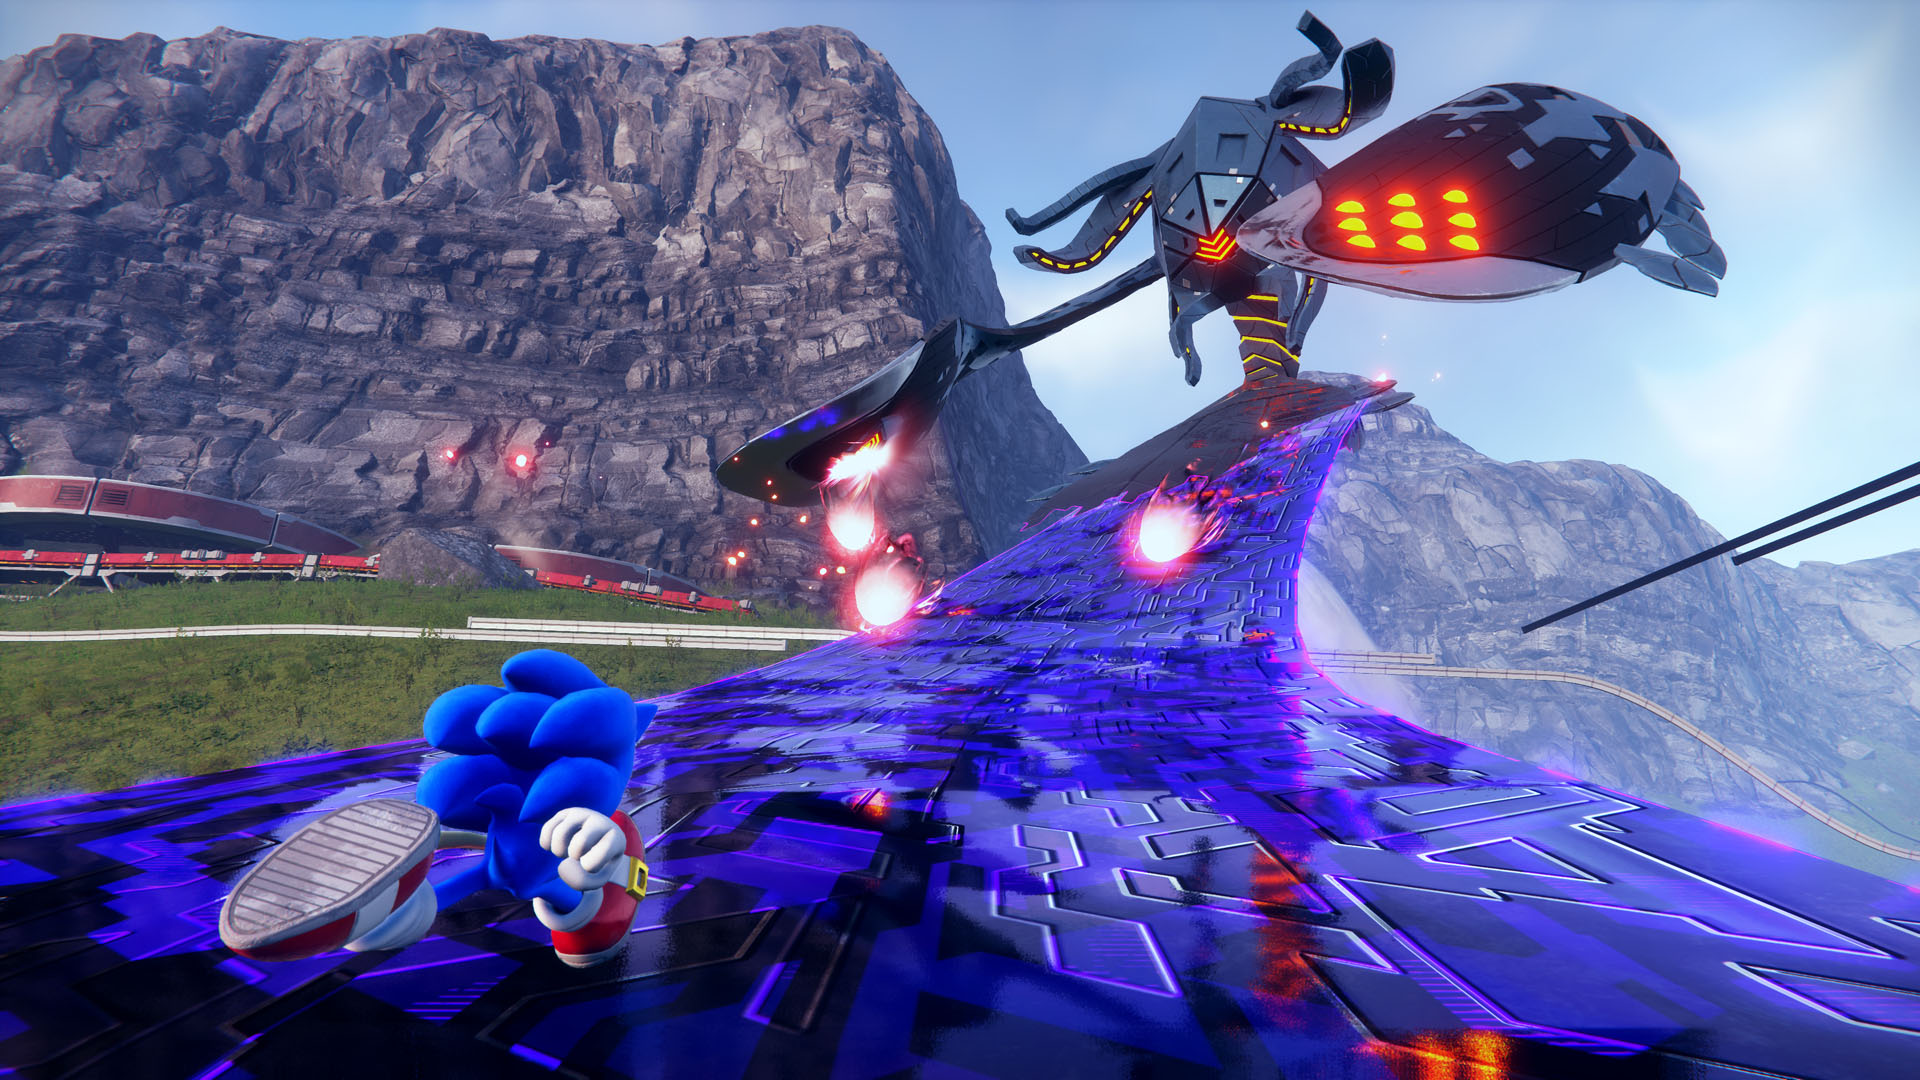 Sonic runs up a purple transparent road toward a large high-tech ship that shoots lasers at him.